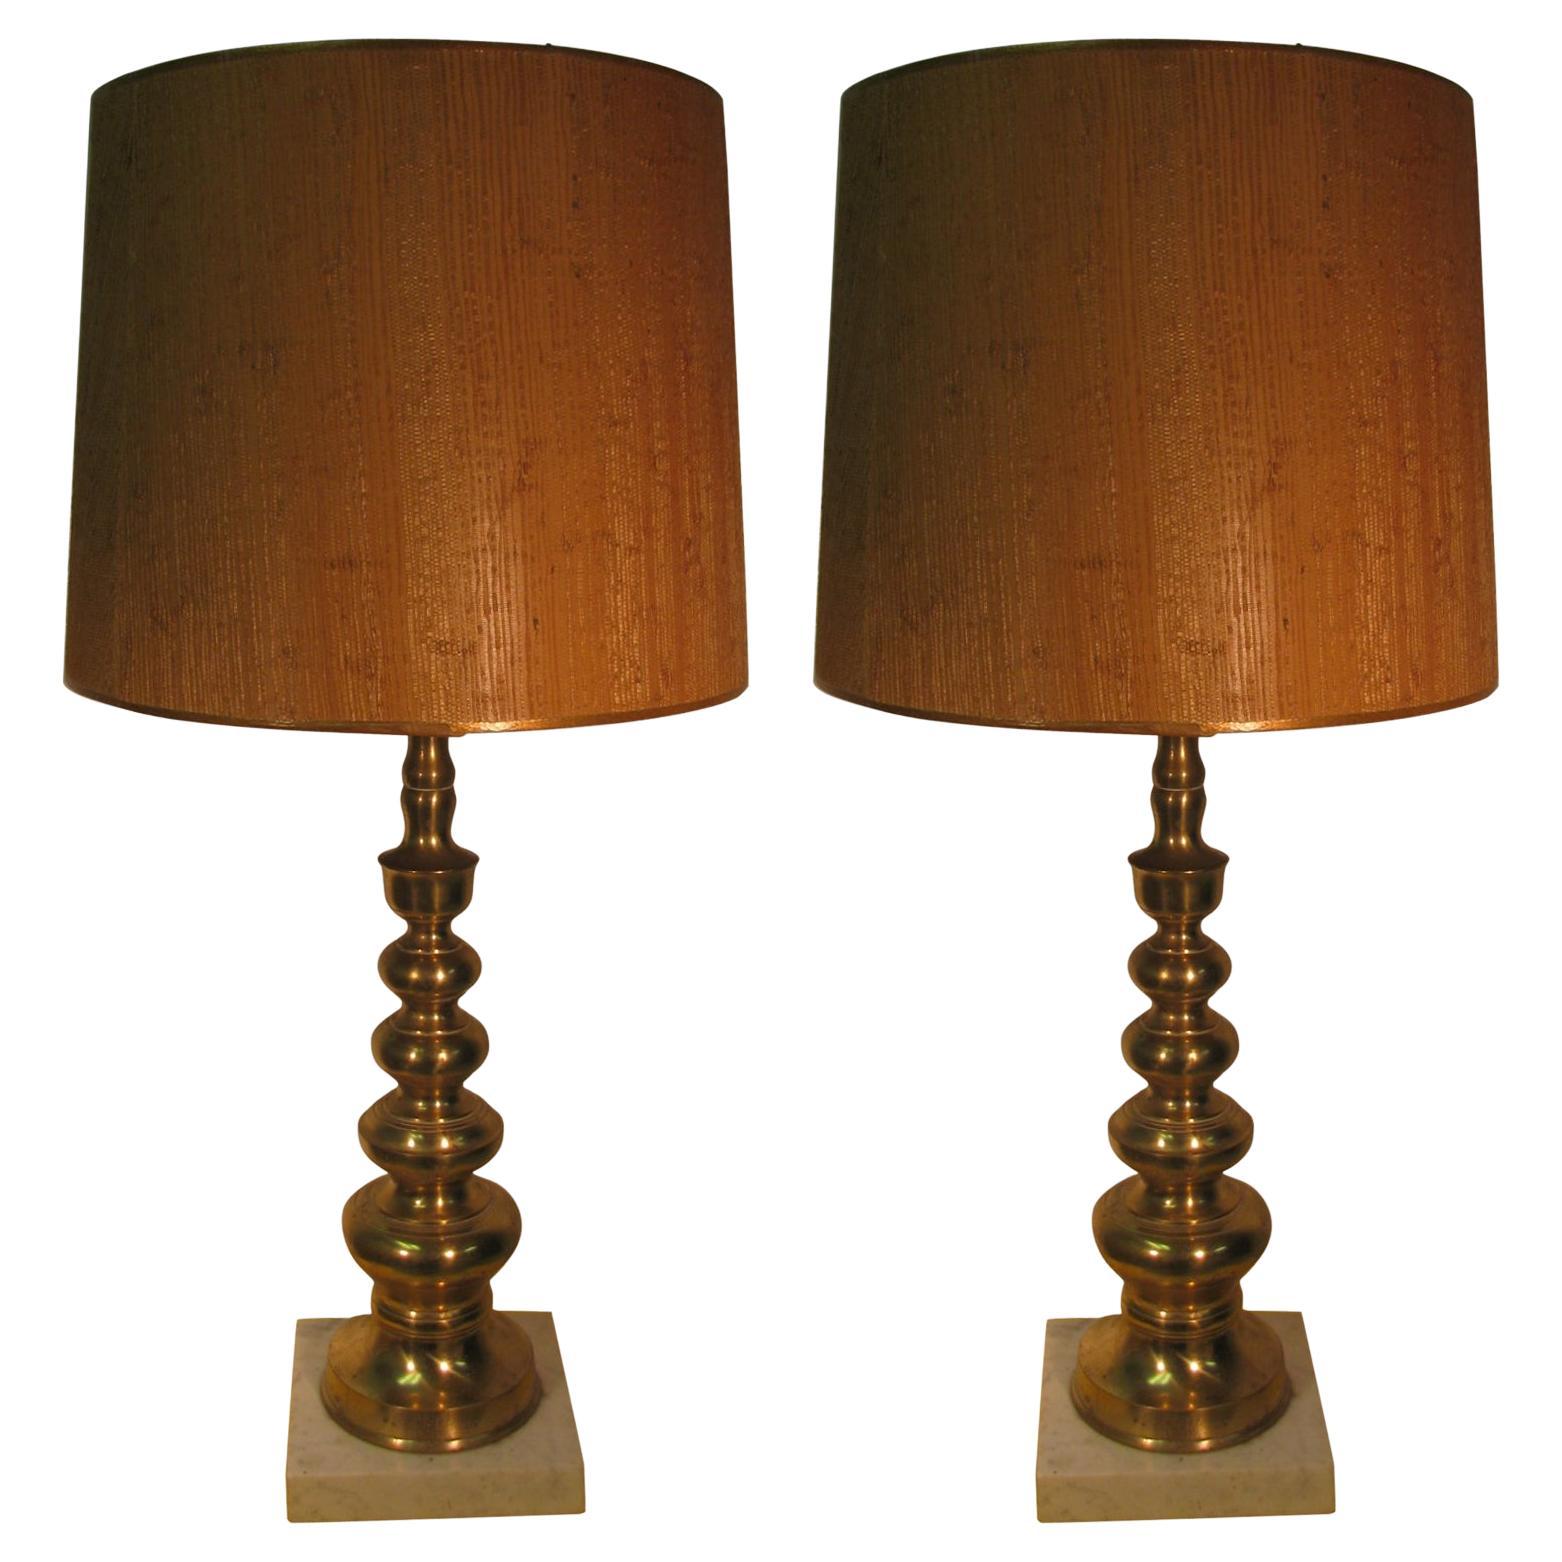 Pair of Mid-Century Modern Tapered Brass Table Lamps